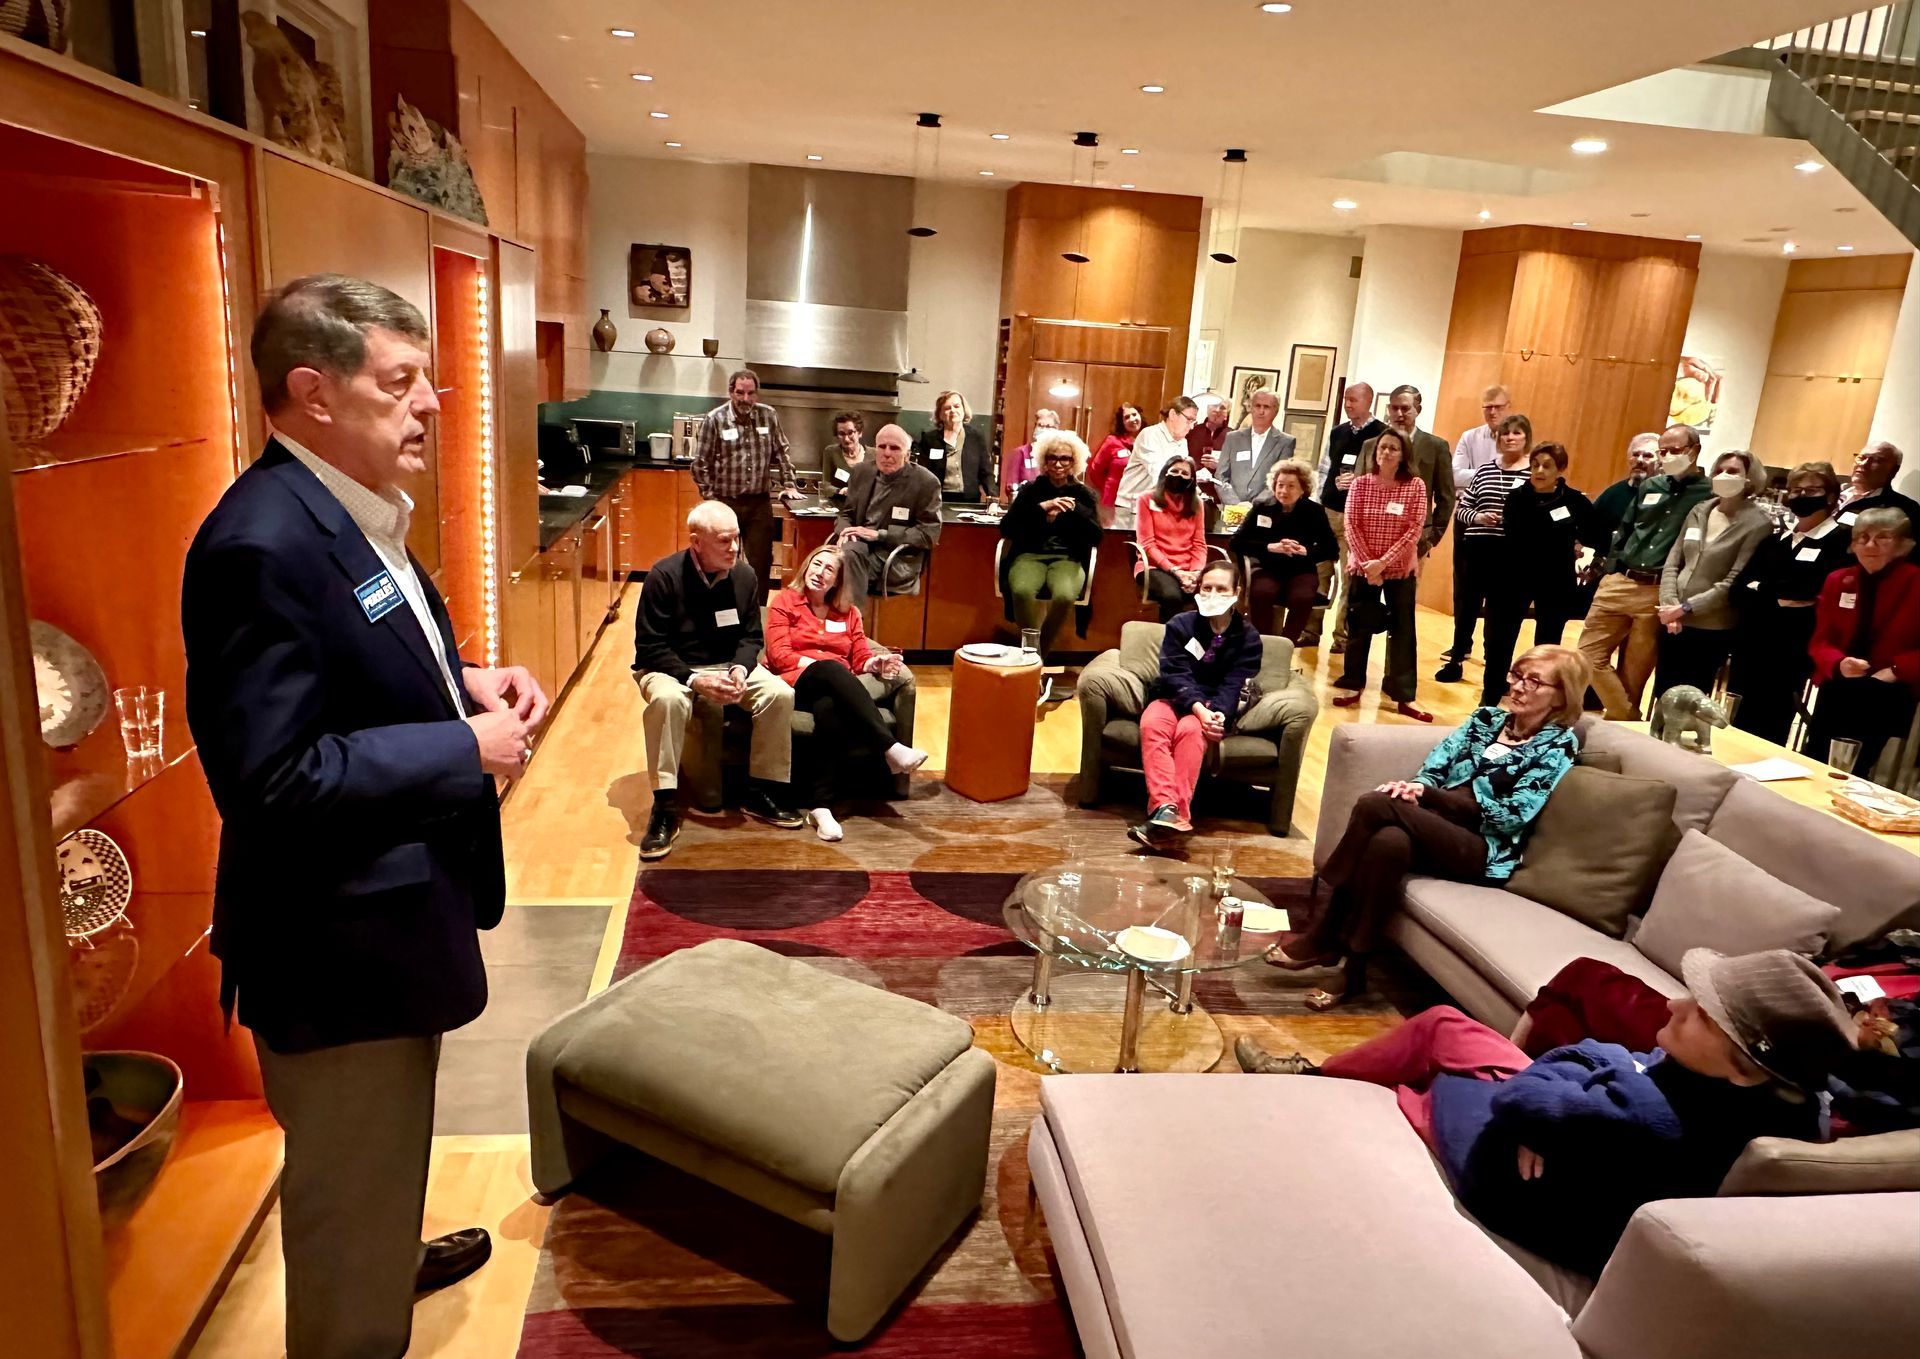 Joe Pereles is standing in front of a group of people in a living room.